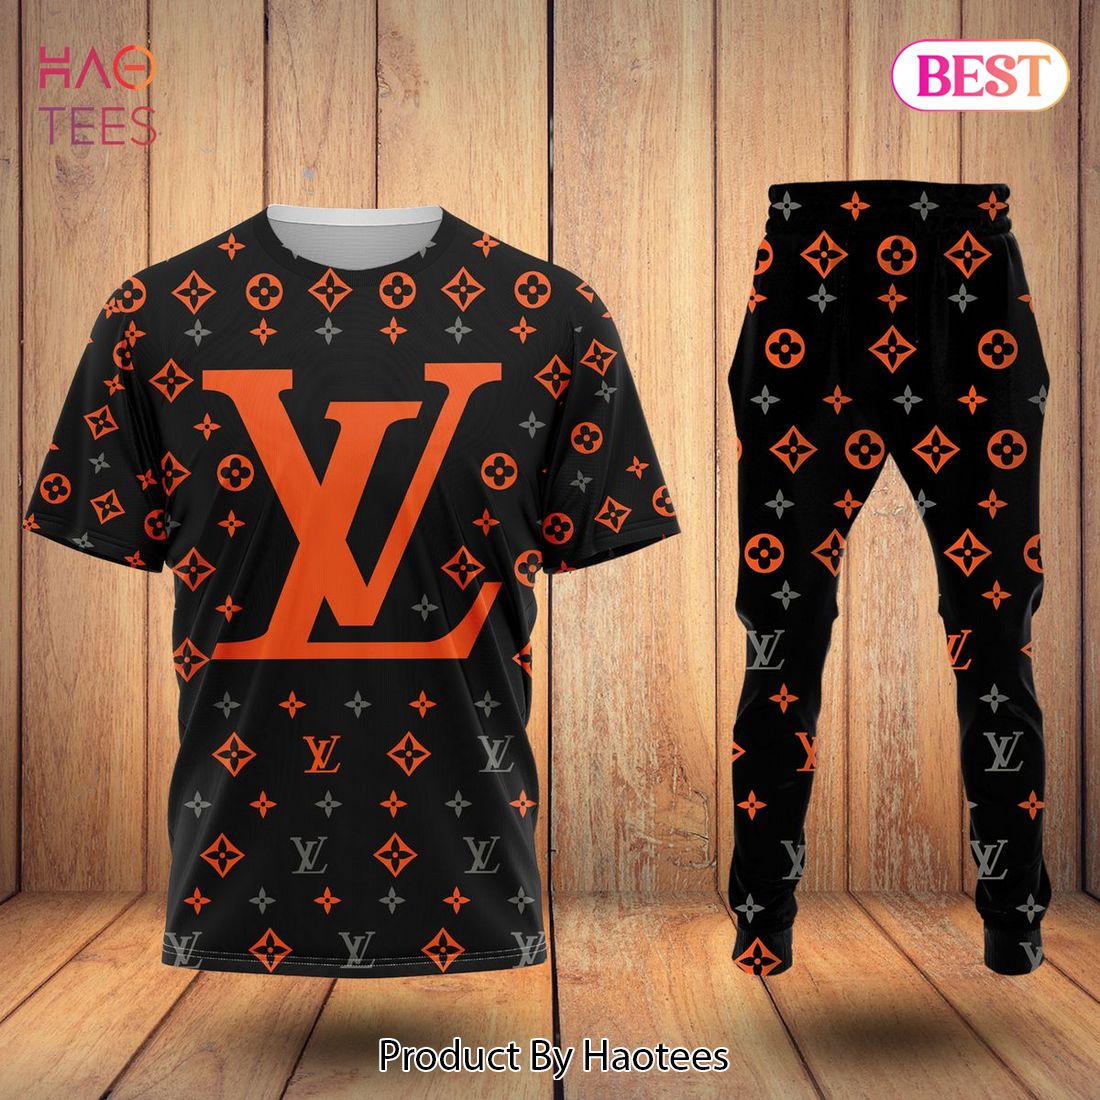 HOT Loouis Vuitton Luxury Brand Orange Mix Black T-Shirt And Pants Limited Edition